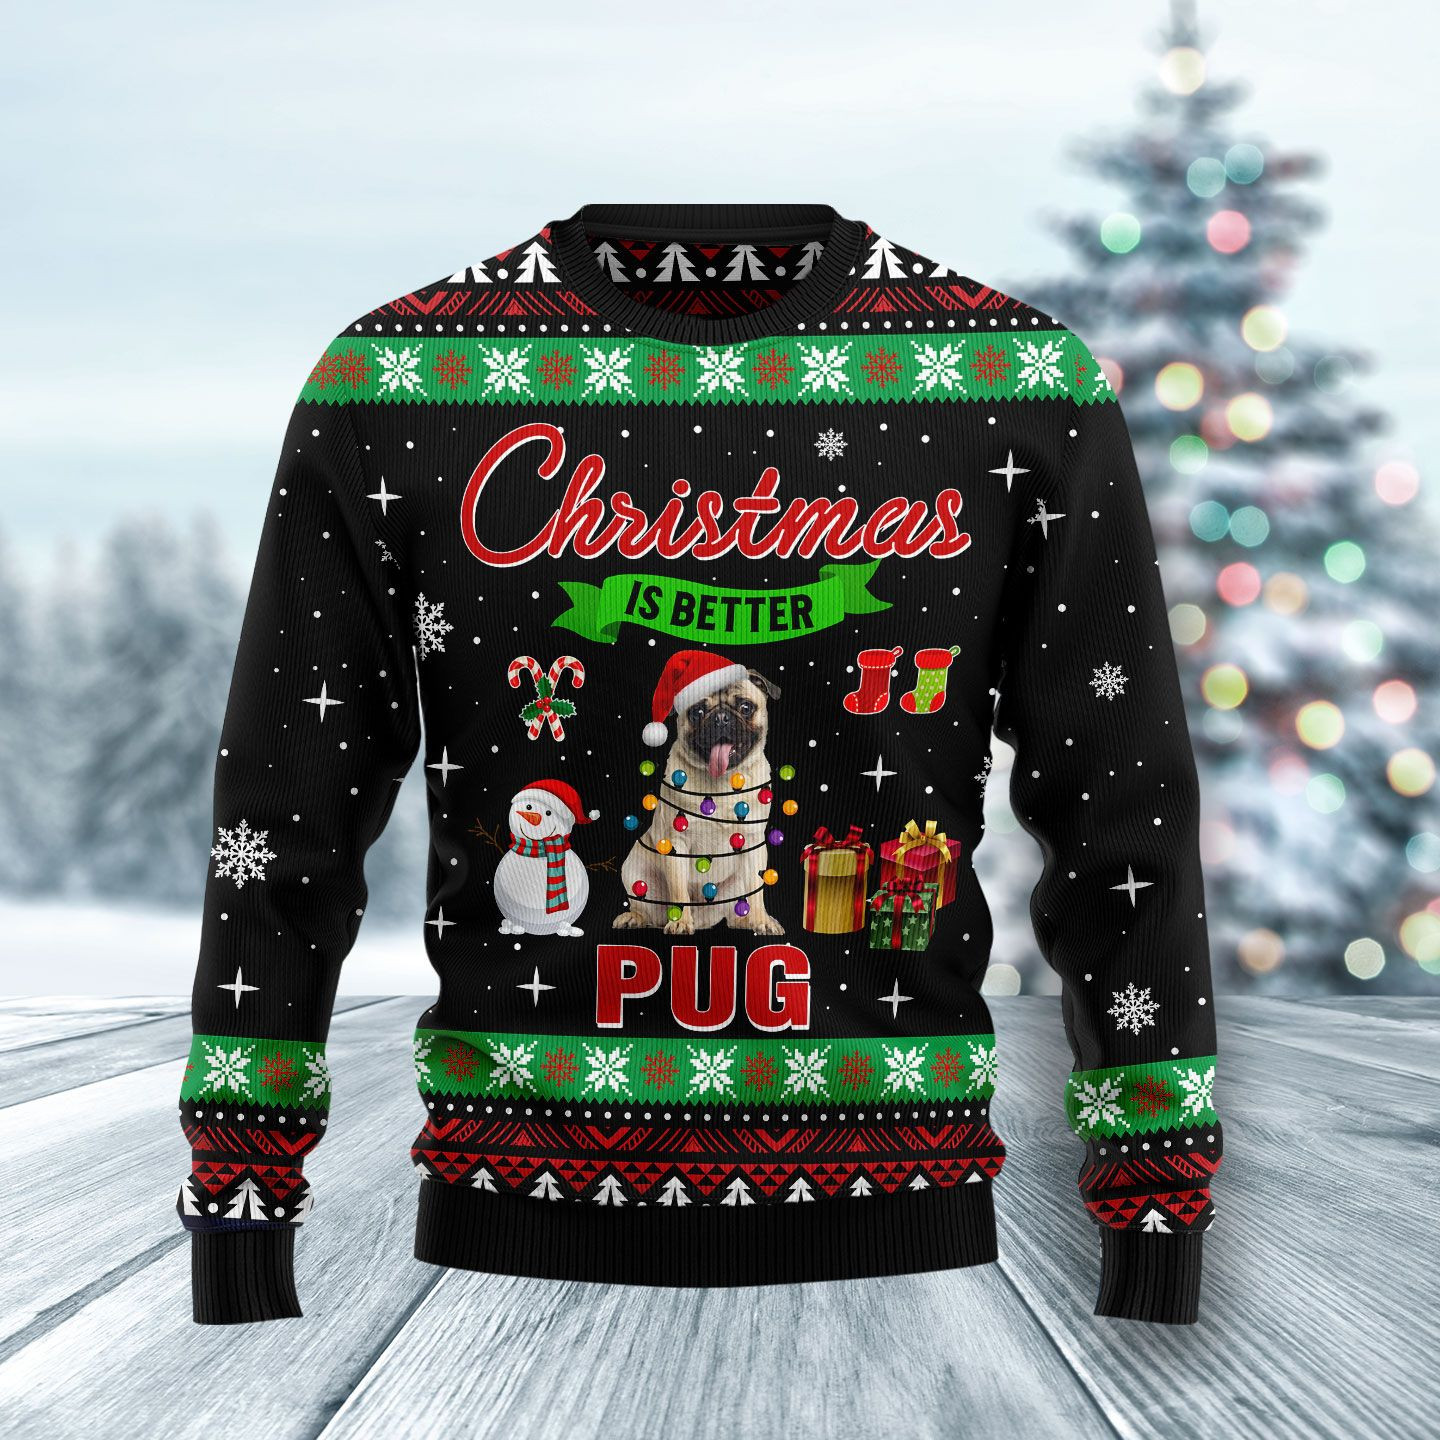 Christmas Is Better With Pug Ugly Christmas Sweater, Ugly Sweater For Men Women, Holiday Sweater